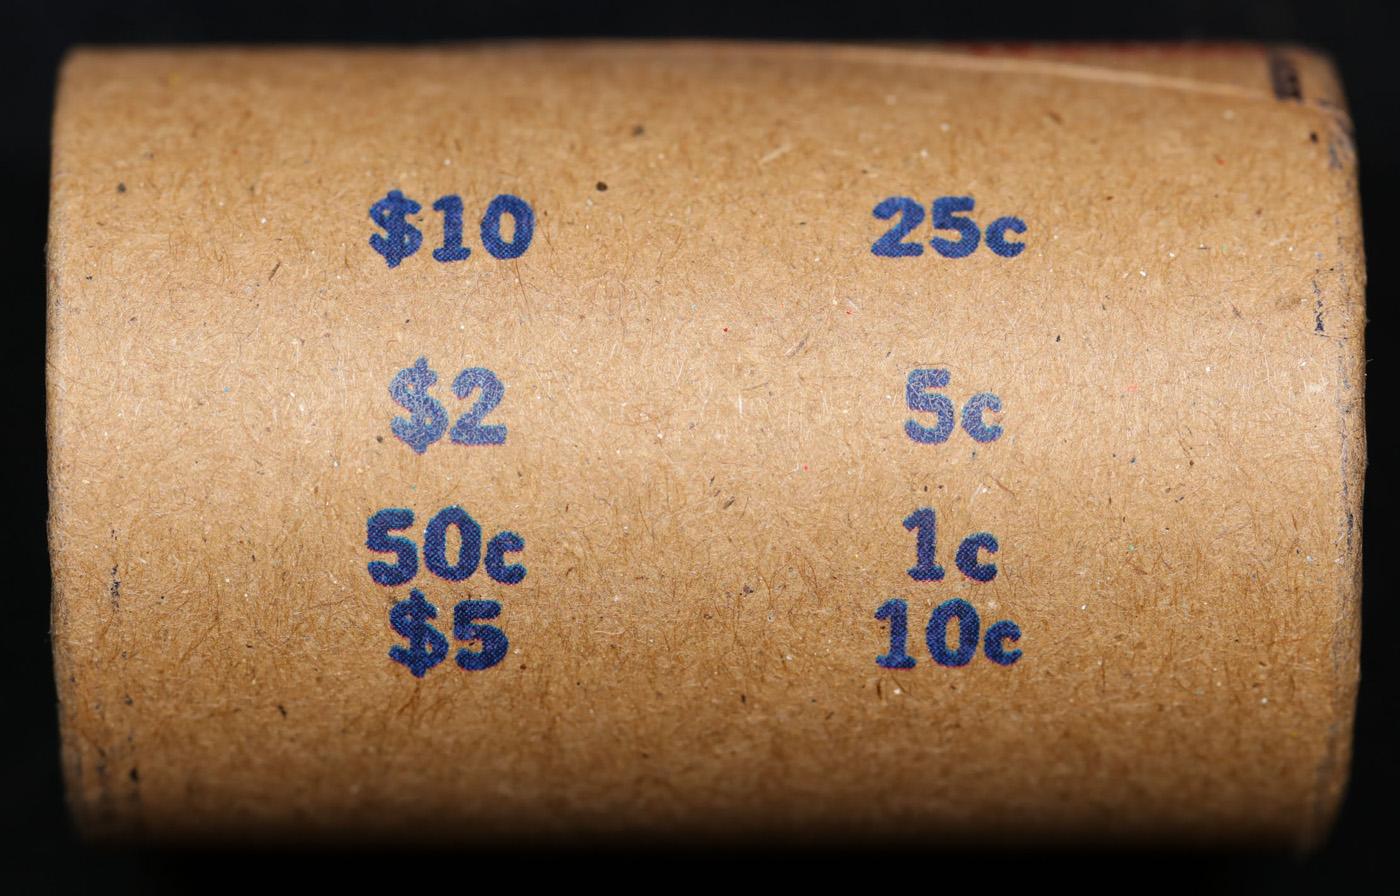 *Uncovered Hoard* - Covered End Roll - Marked "Unc Morgan Standard" - Weight shows x10 Coins (FC)